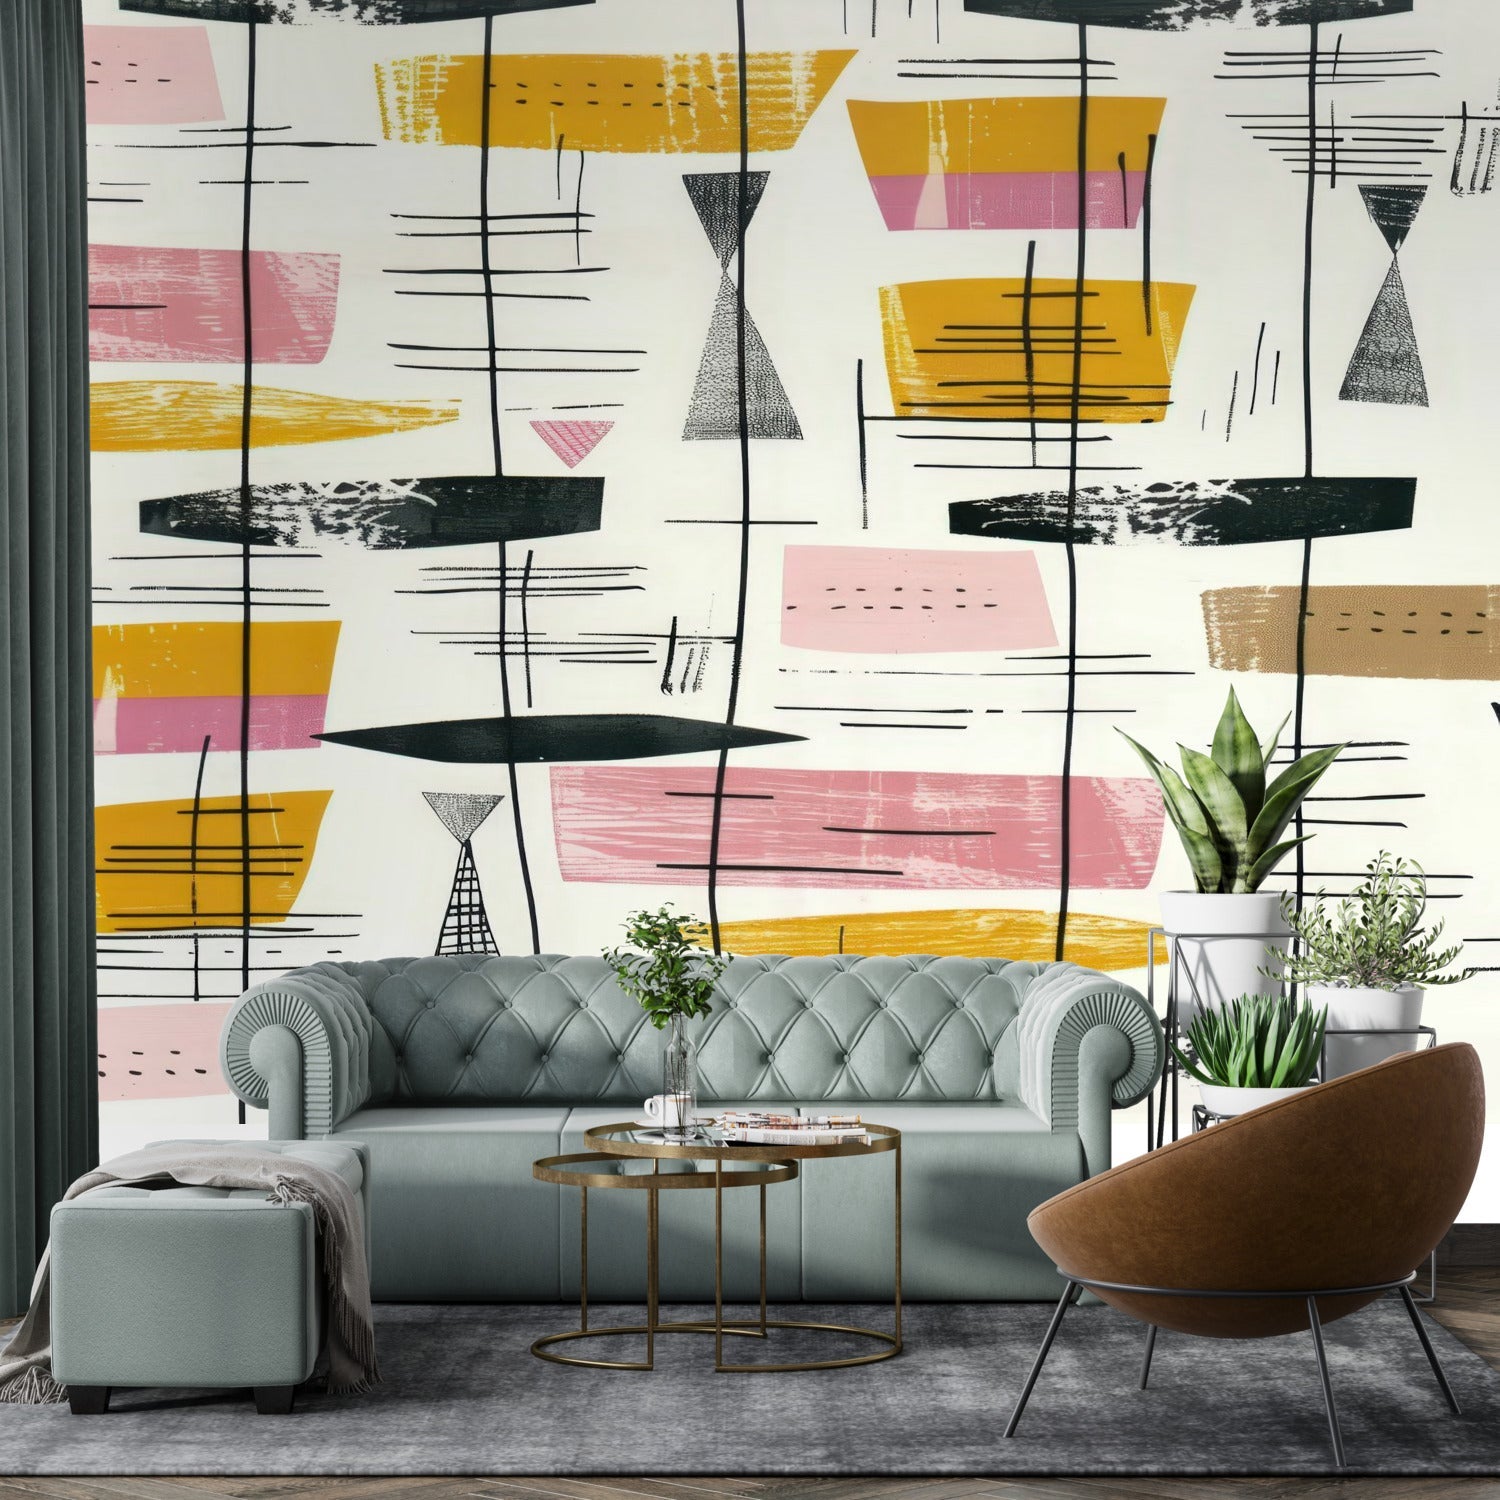 Kate McEnroe New York Retro Abstract Wall Mural, Mid Century Modern Peel And Stick Design, 1950s Style Home Decor, Geometric Mural Panels, Vintage Accent Wall ArtWall Mural118577